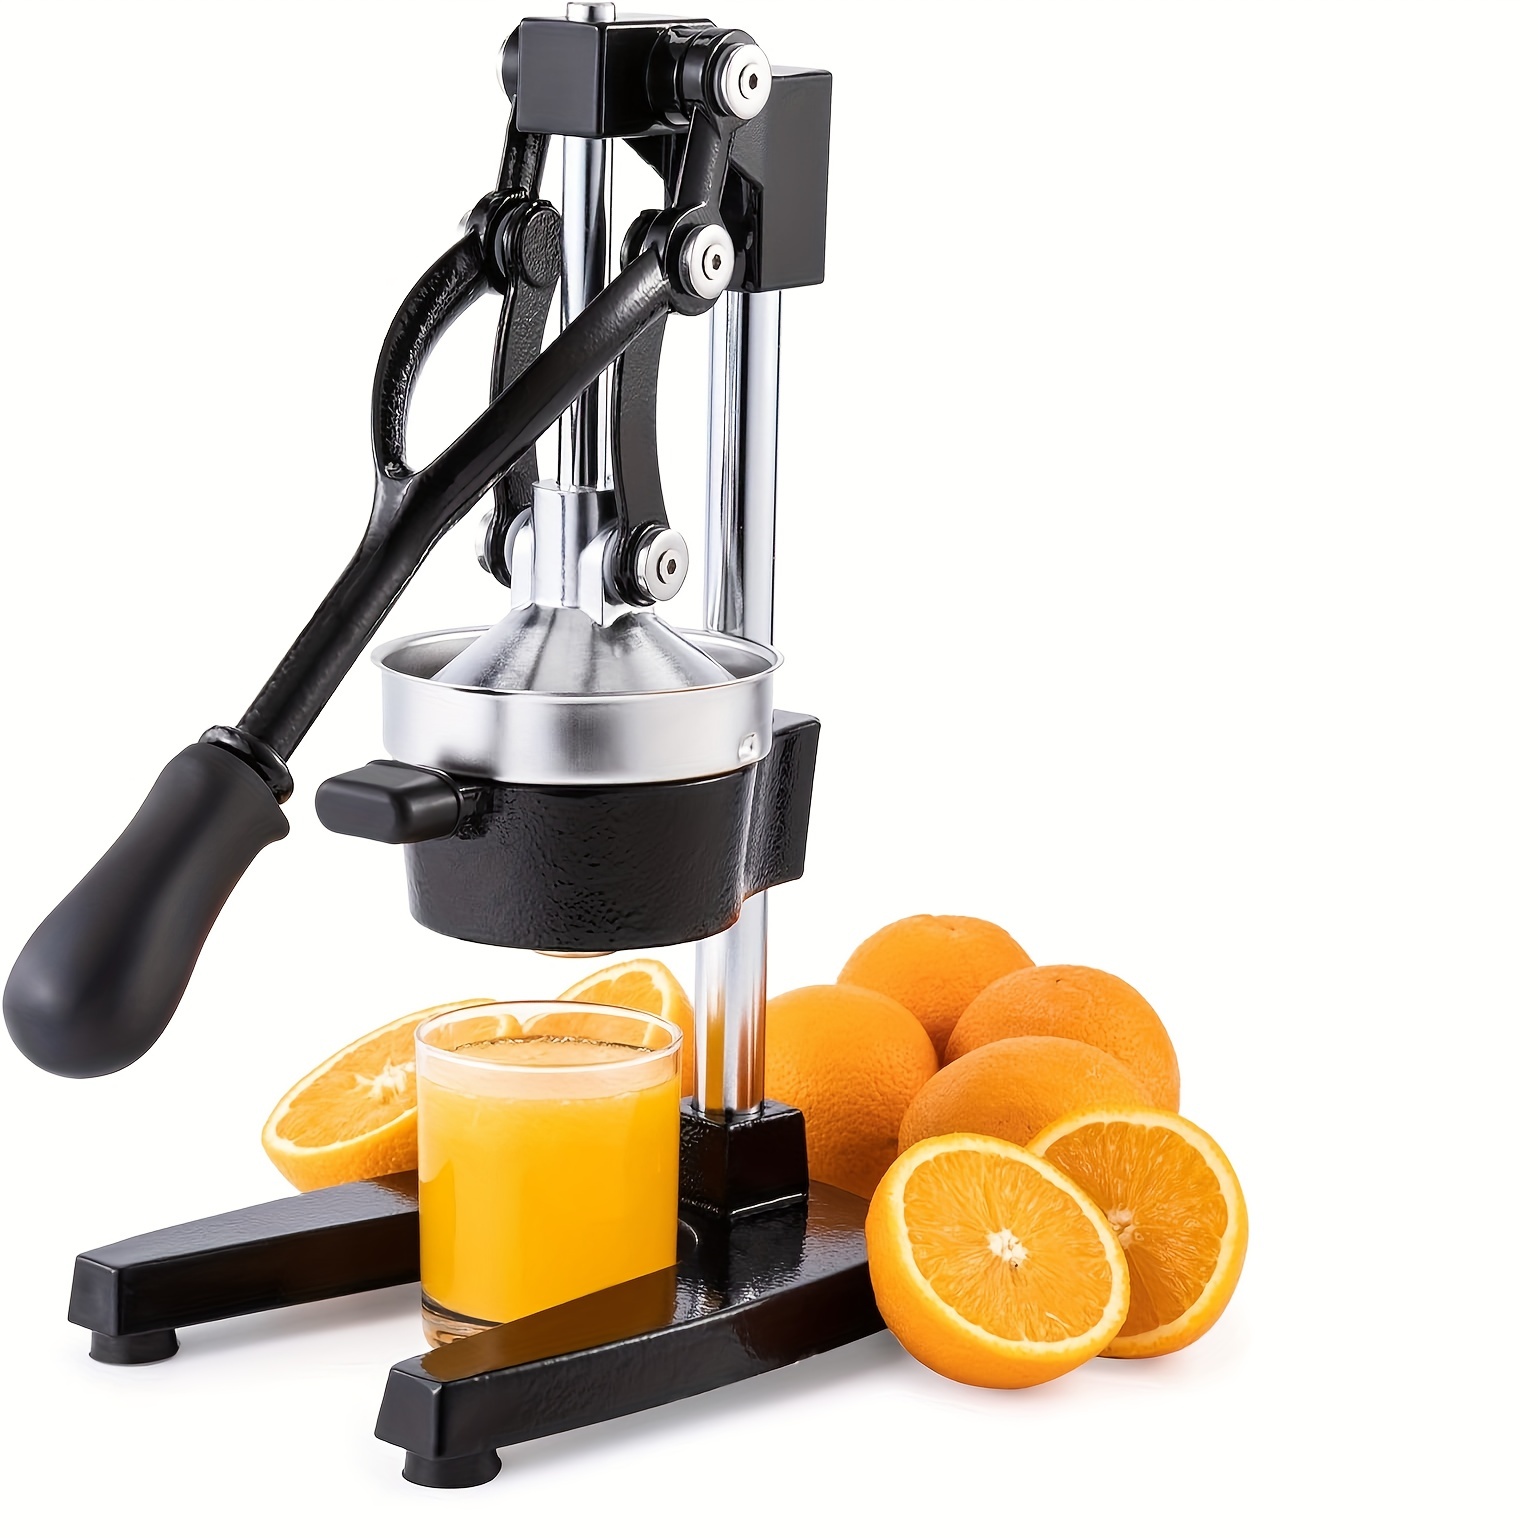 Buy GITGRNTH Manual Orange Squeezer Citrus Juicer With Strainer And  Silicone Ice Mold, Lemon Squeezer, Hand Squeezer Fruit juicer,  Multi-function Manual Juicer, 4 in 1 Manual Juicer With Juicer Cup Online at